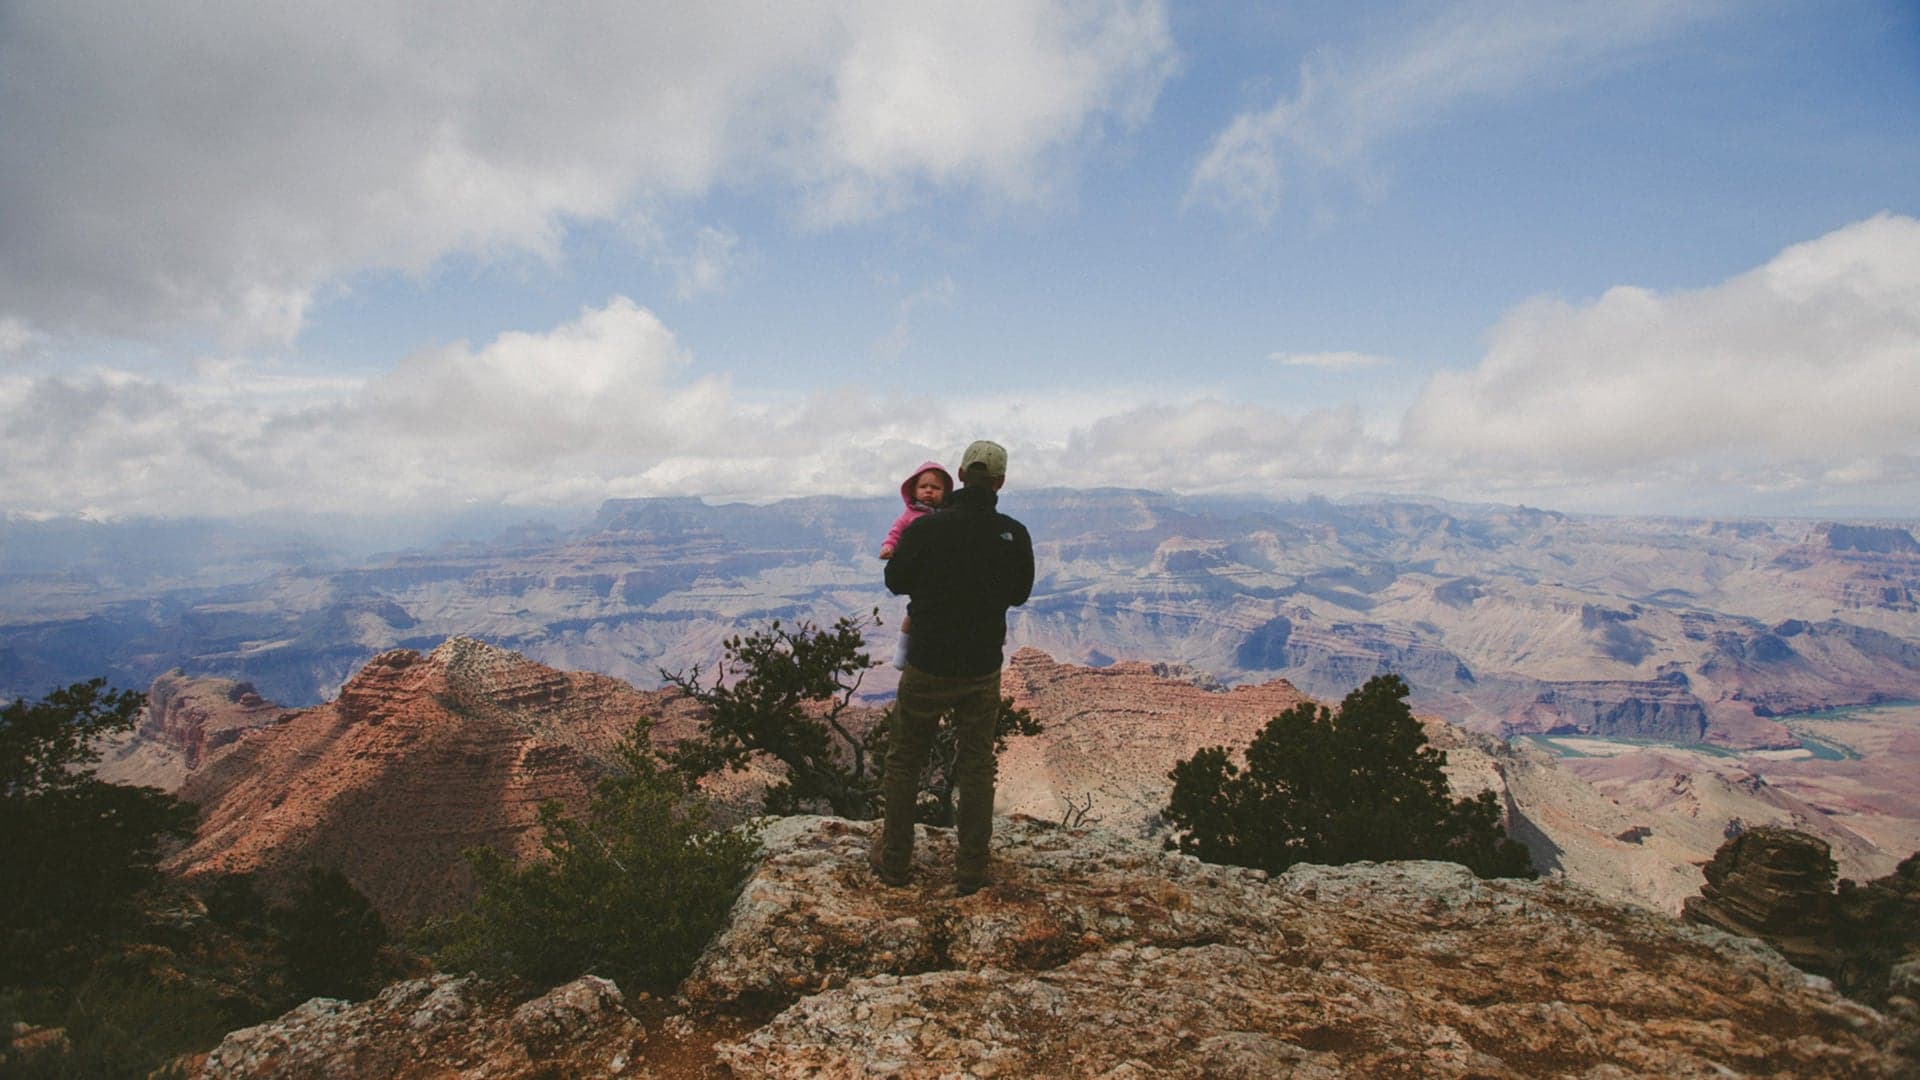 Cold, Wet, and Frozen Stiff on the Forgotten Edge of the Grand Canyon